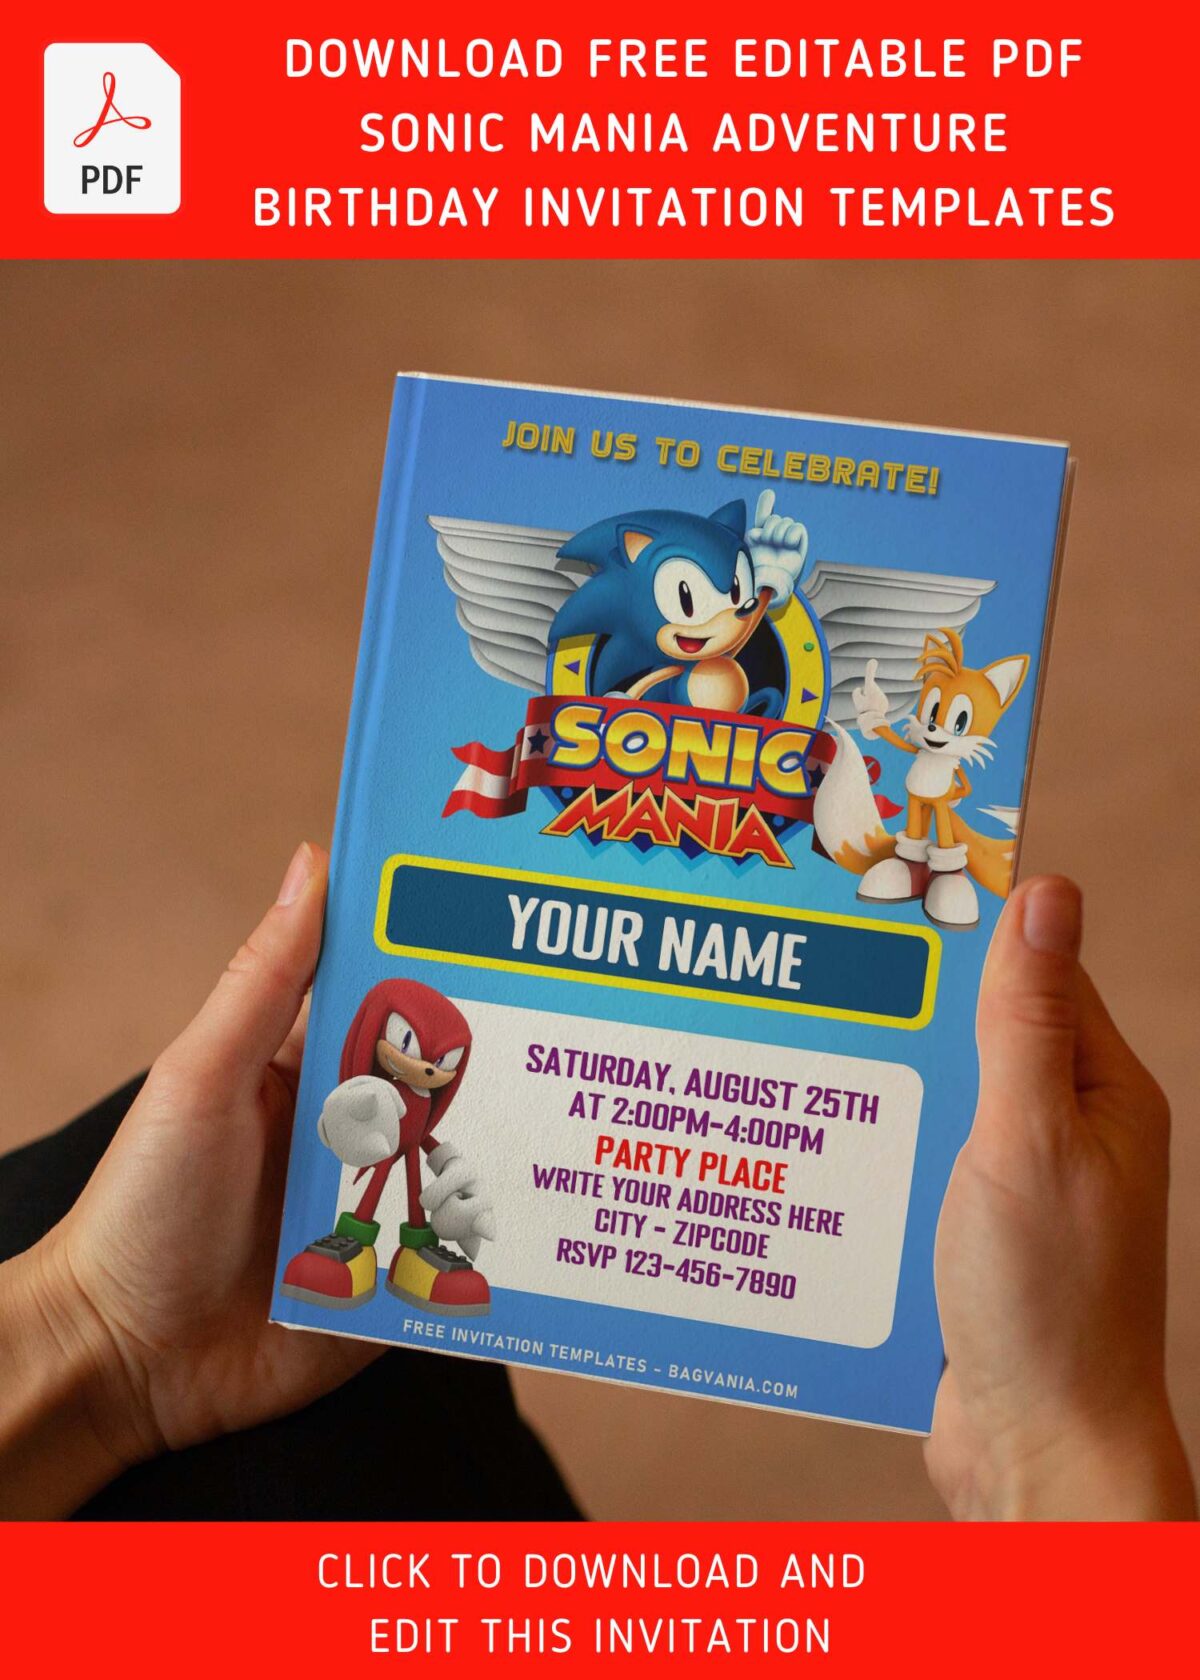 (Free Editable PDF) Super Cool Classic Sonic The Hedgehog Birthday Invitation Templates with adorable Miles Tails Prower